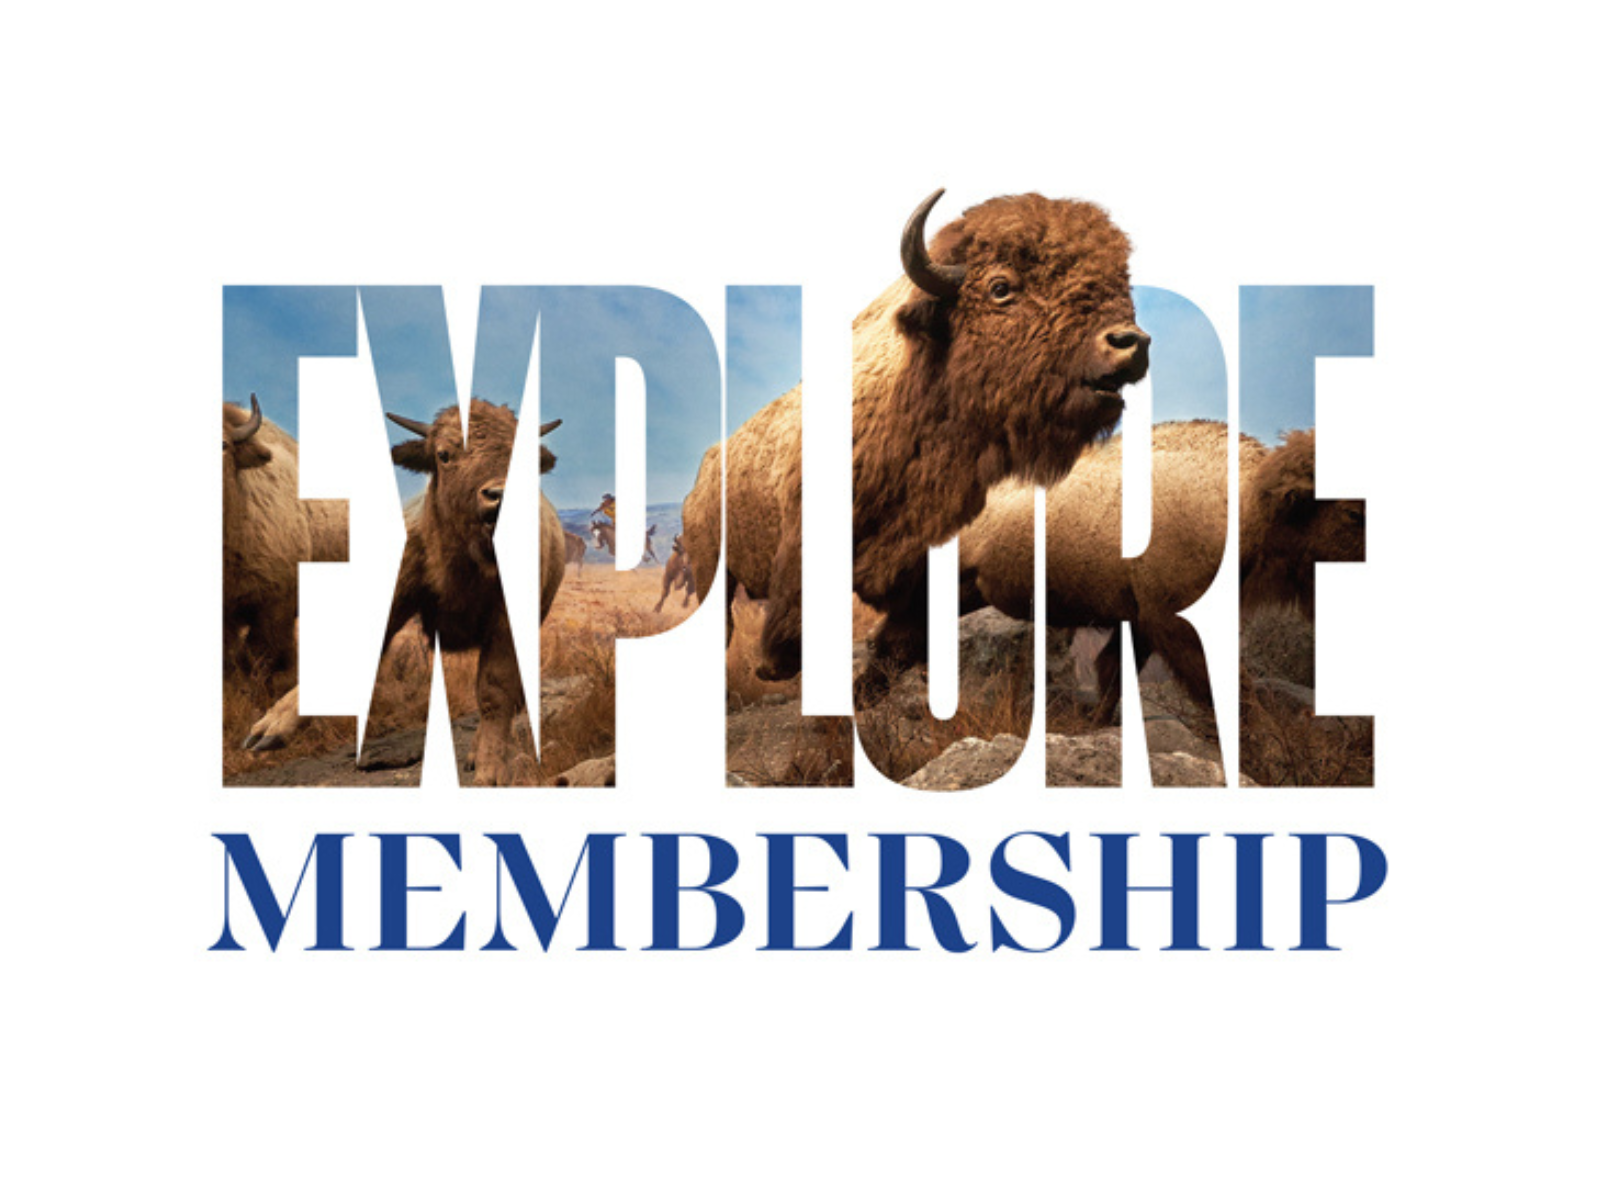 The word “EXPLORE” in large letters, with the Manitoba Museum bison diorama bursting though from behind the letters. Below it text reads, “Membership”.